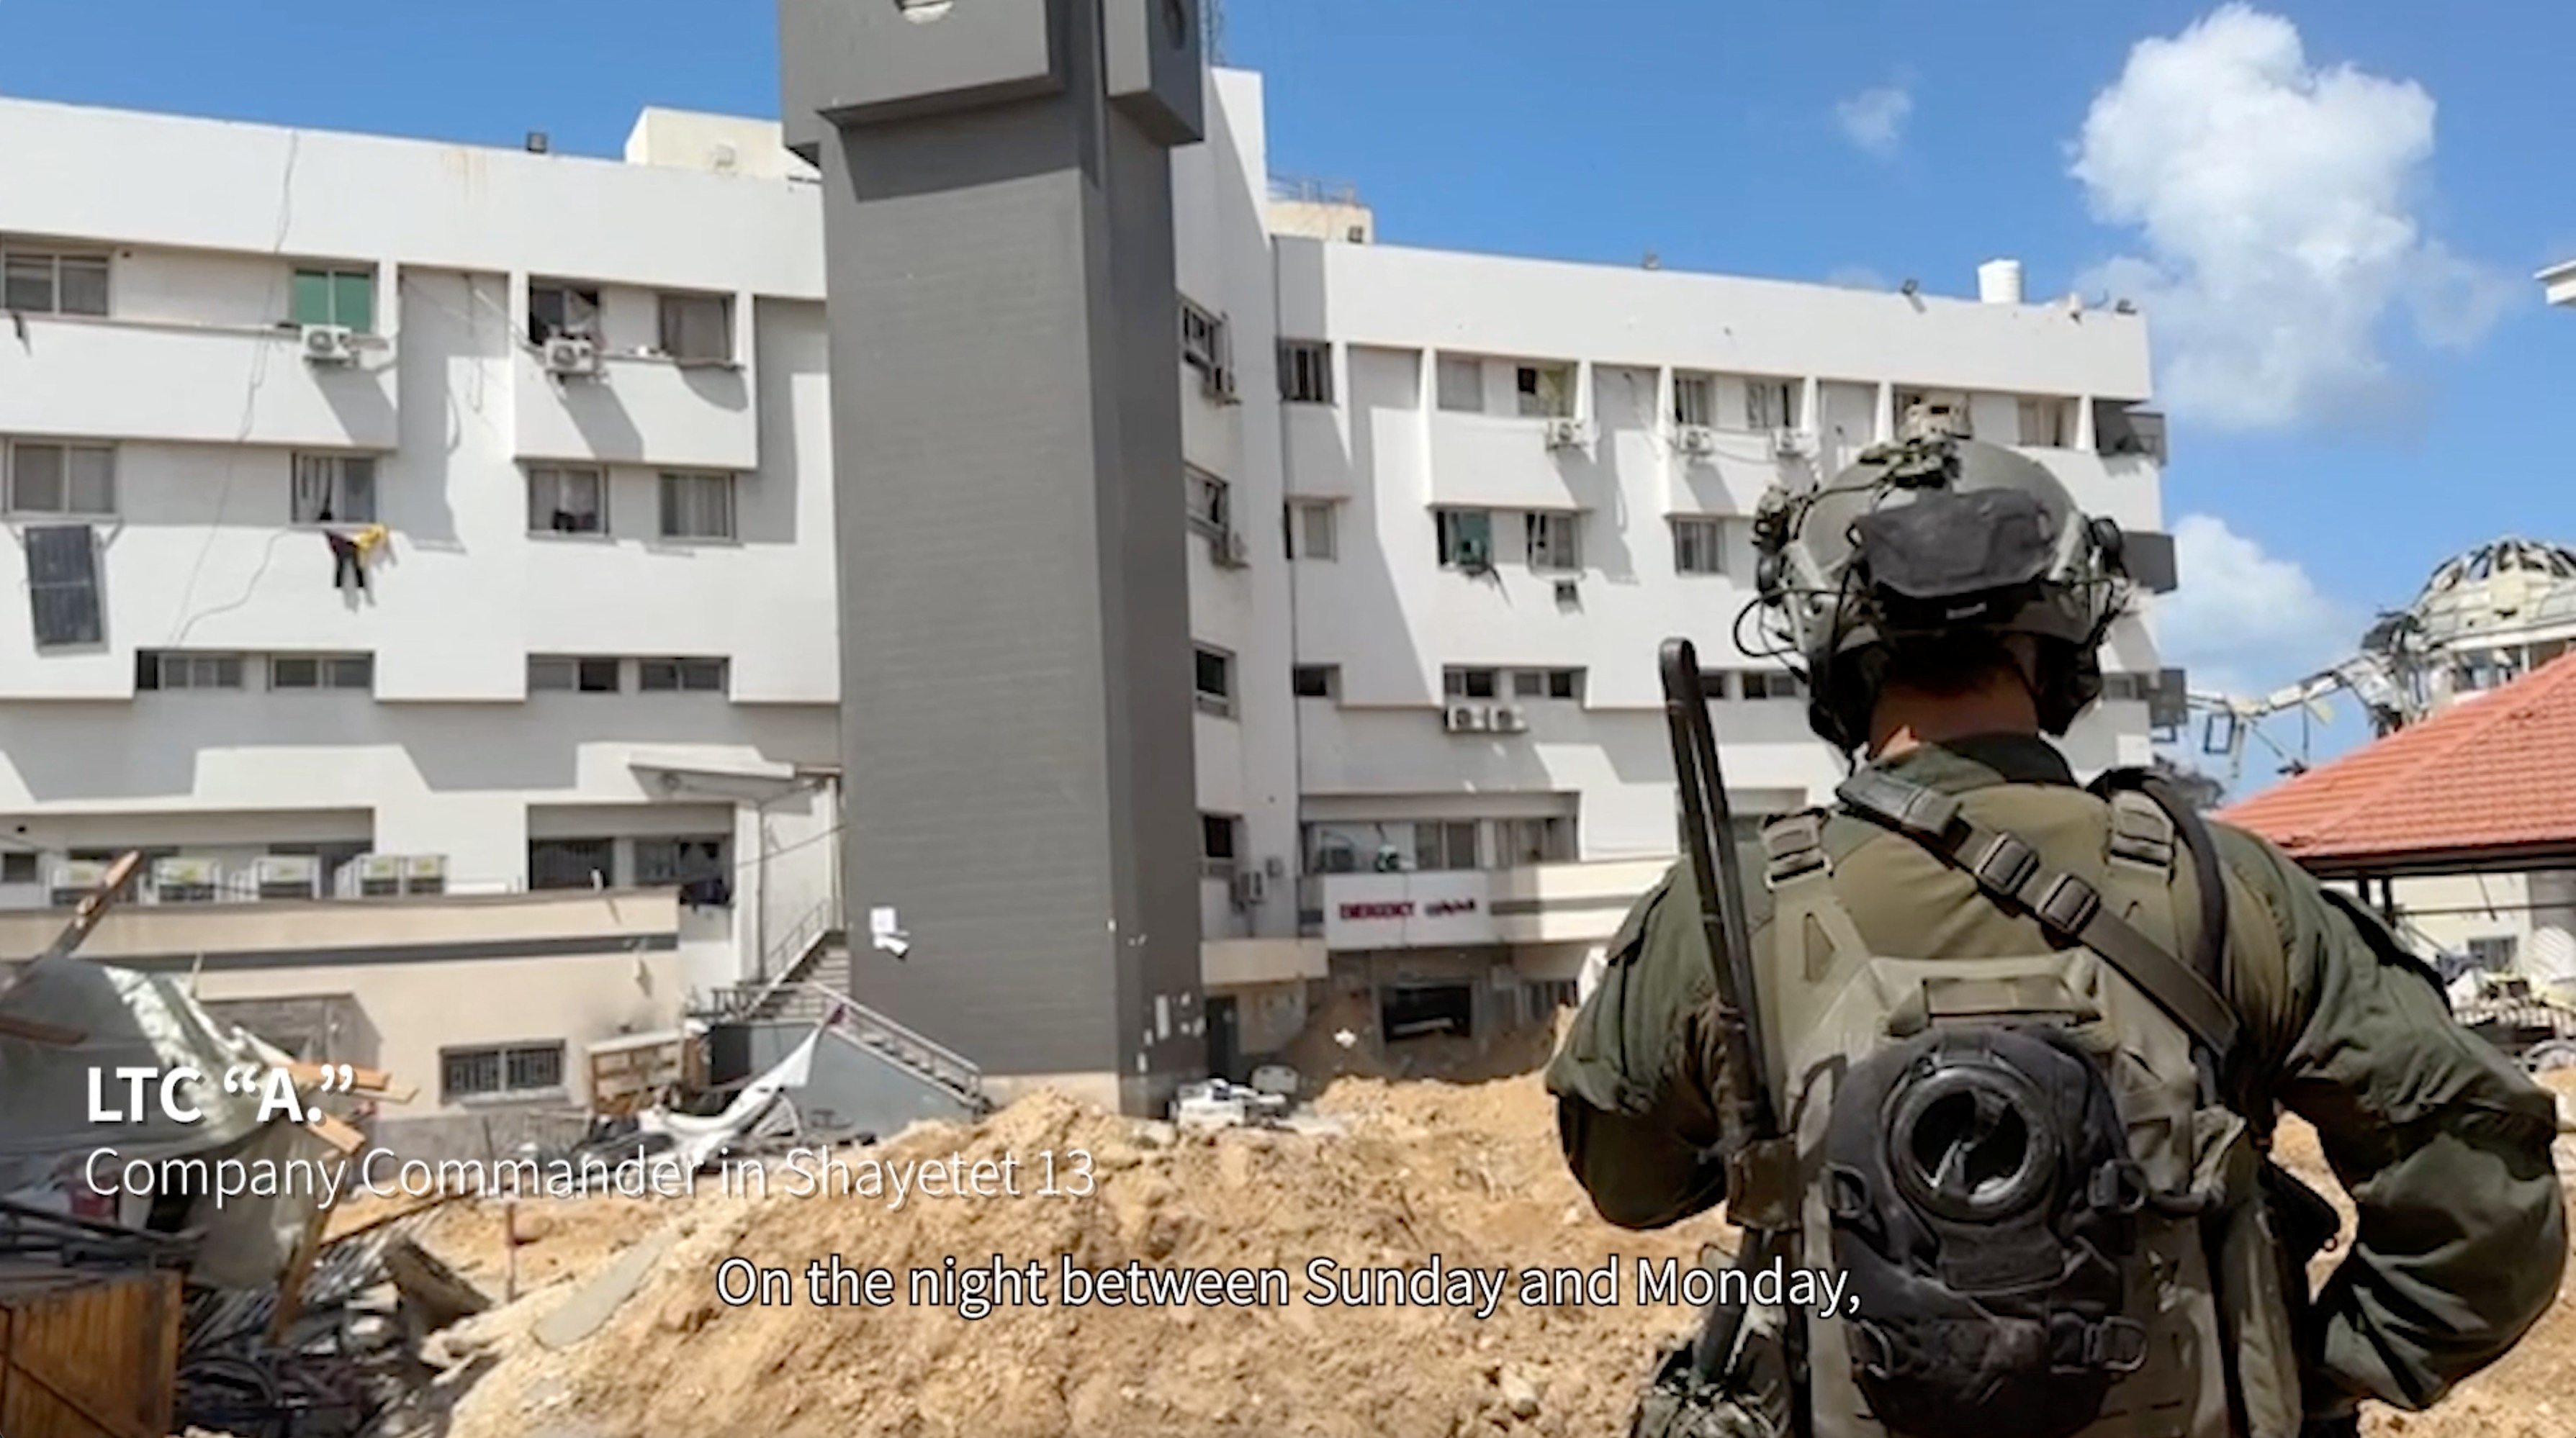 An Israeli soldier stands near al-Shifa hospital, where the Israeli army says weapons were found, in Gaza City